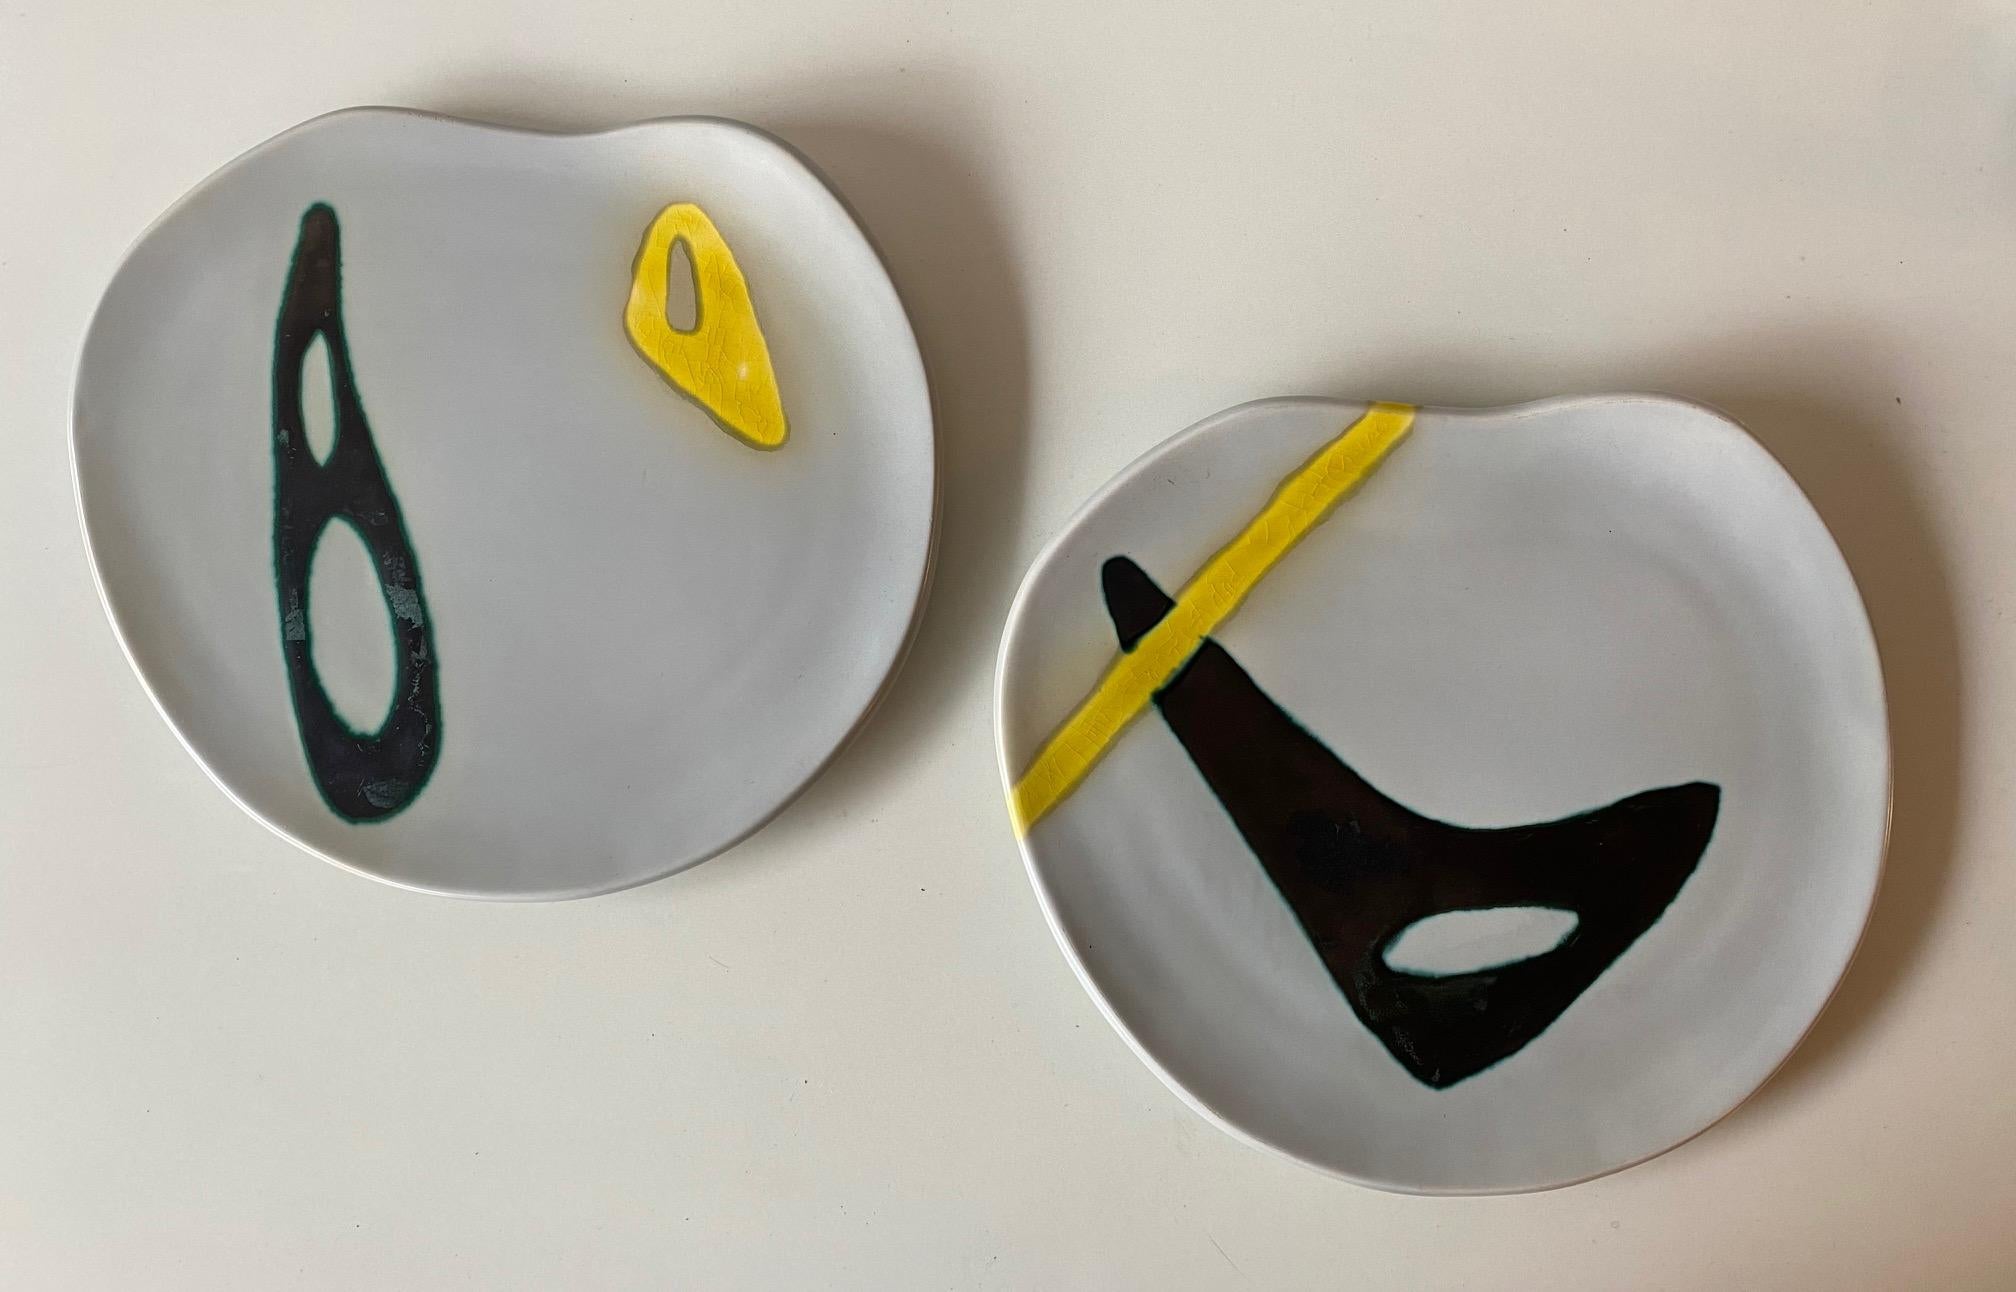 Ceramic Plateq by Peter Orlando, France, 1960s
American artist who worked (1953-2009) and died in France.